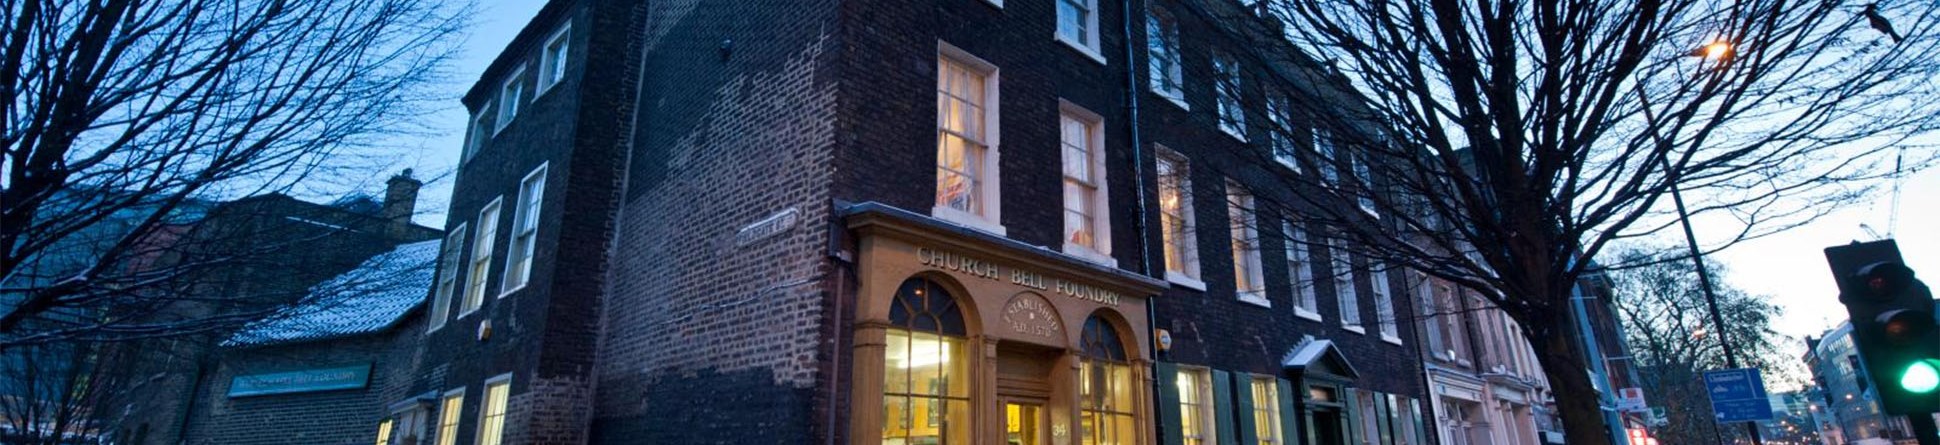 Exterior view of the Whitechapel Bell Foundry